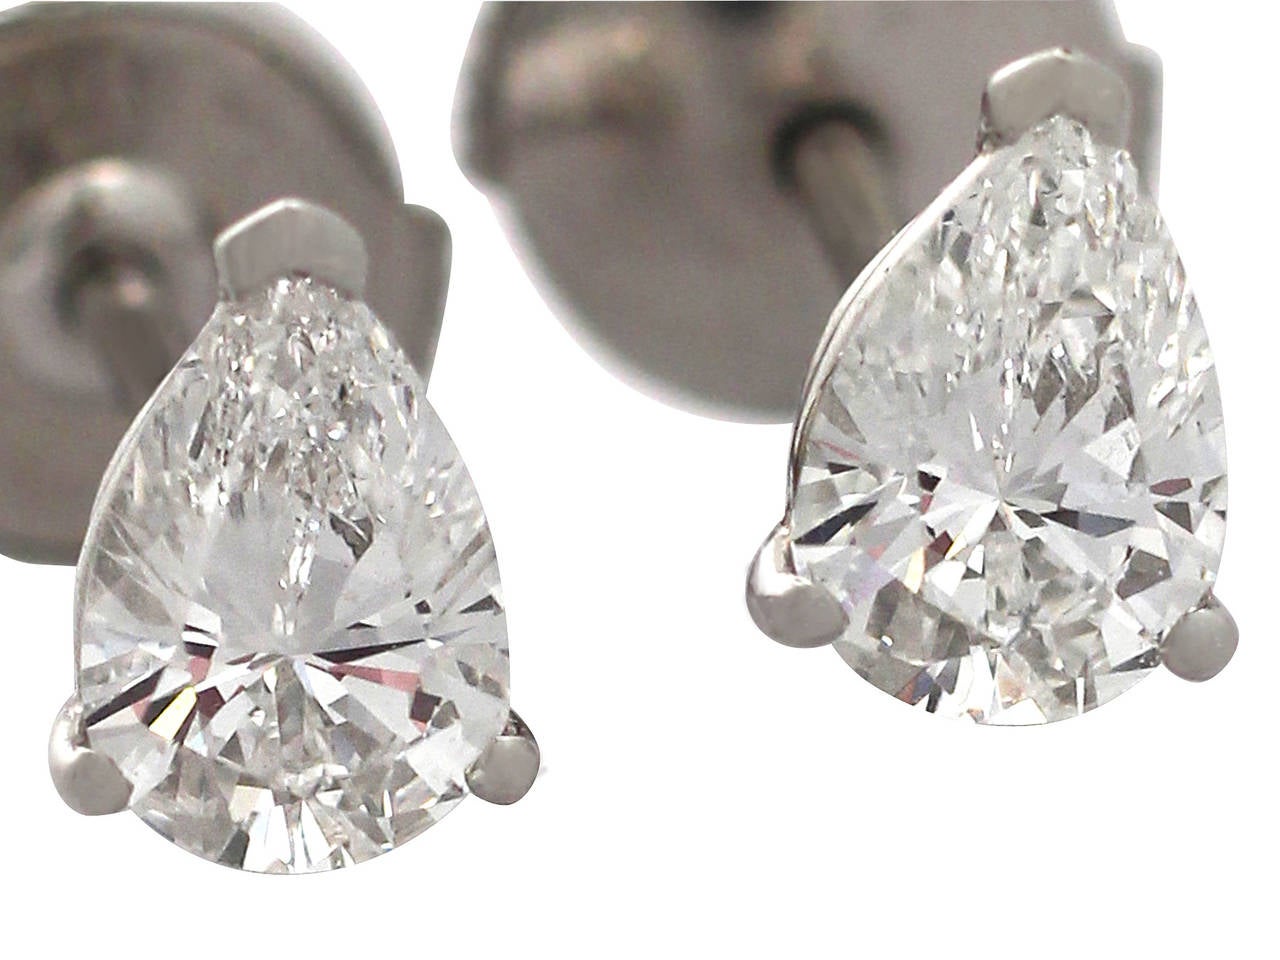 A fine and impressive pair of contemporary 1.15 carat pear cut diamond, platinum stud earrings; part of our diverse jewelry/jewelry collections

These impressive 1.15 carats diamond earrings are crafted in platinum.

Each pierced decorated pear